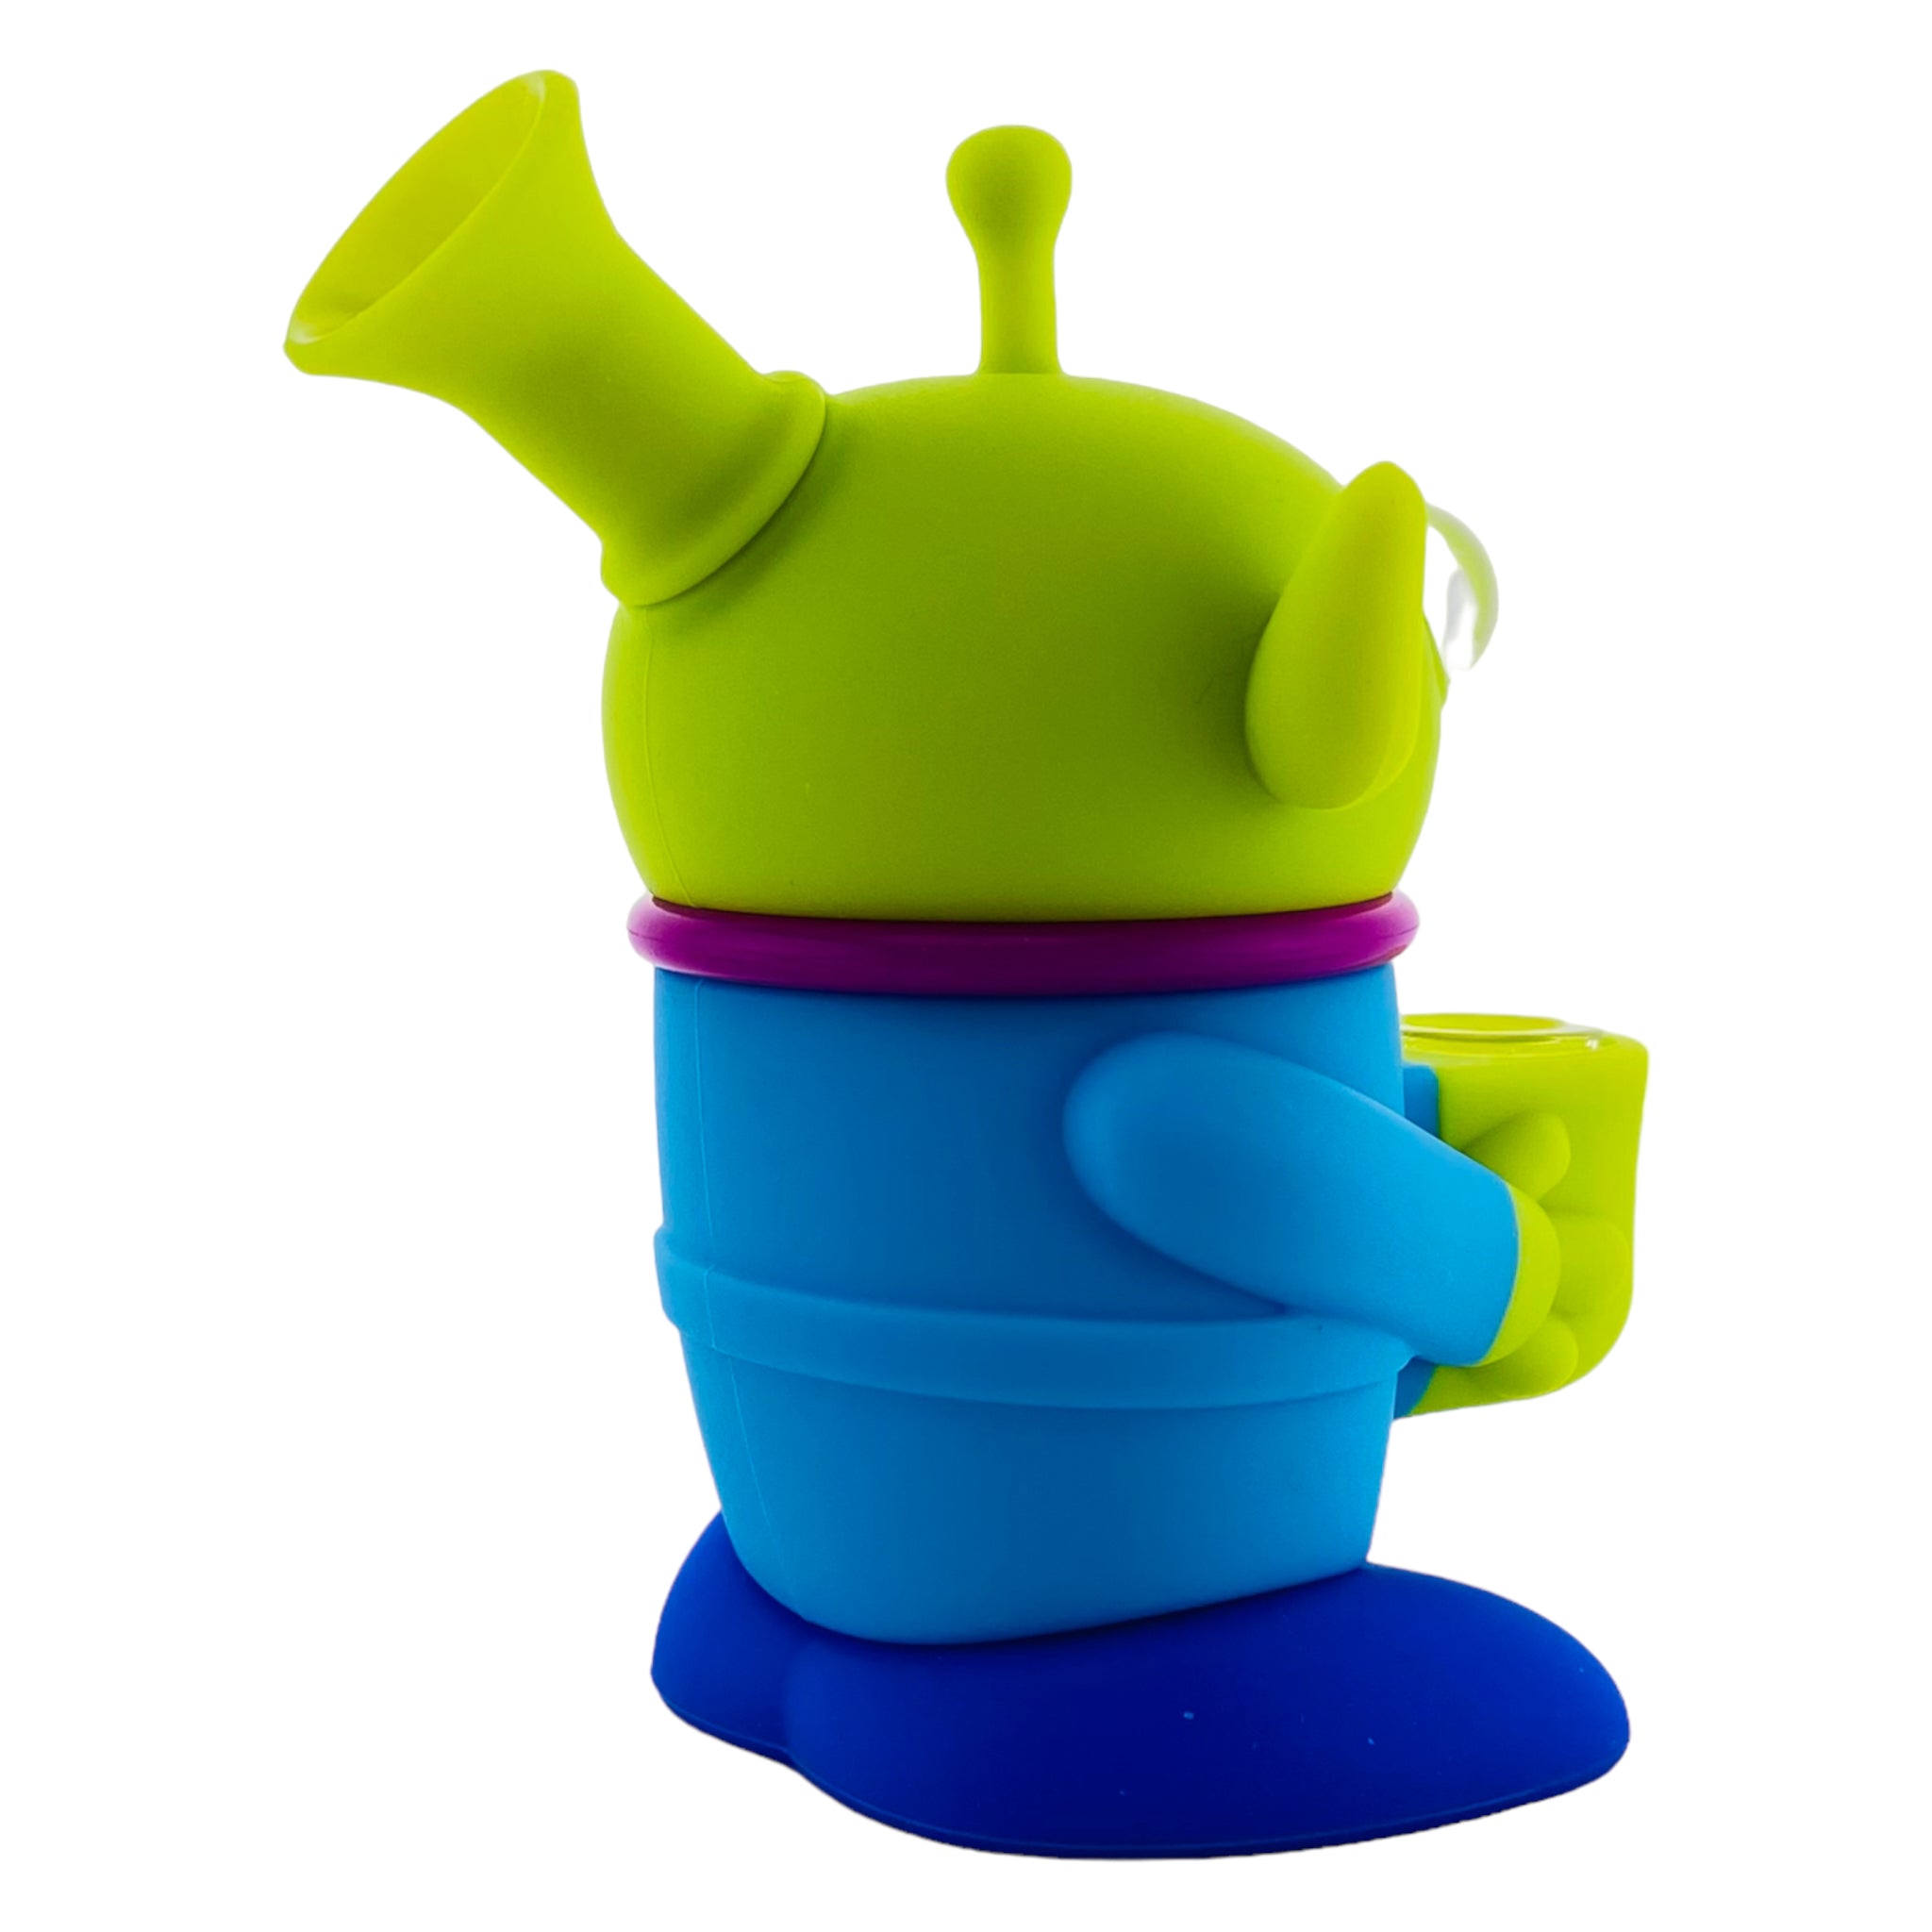 toy story green alien martian silicone hand pipe